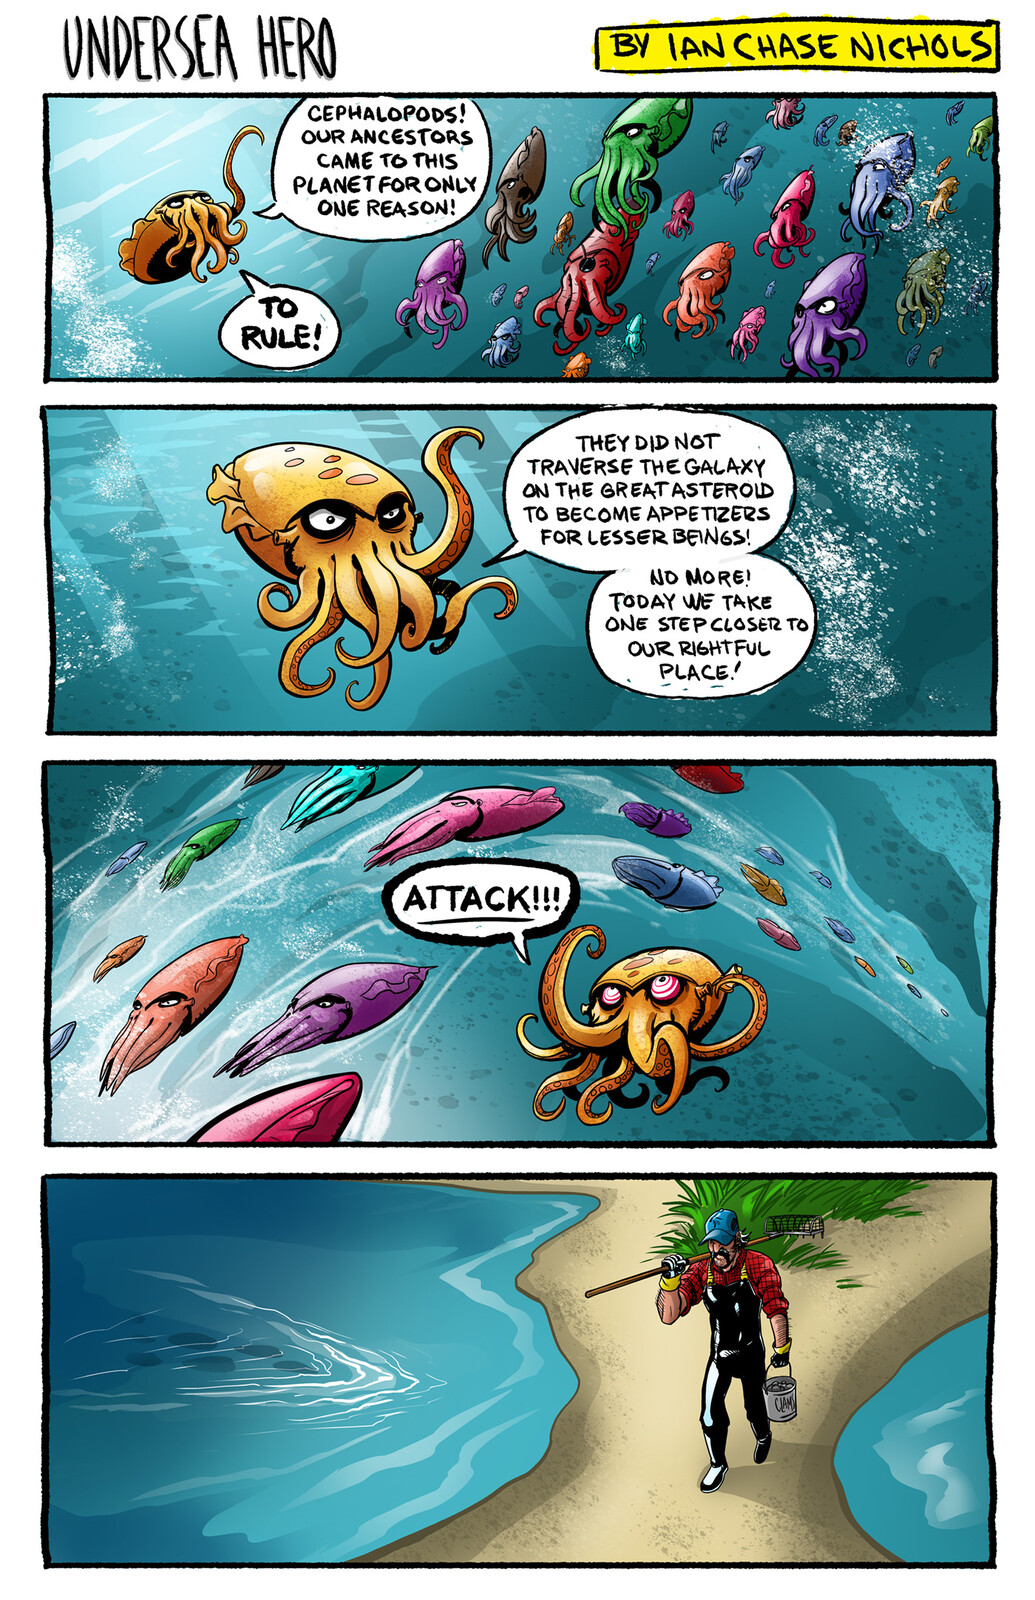 UNDERSEA HERO comic strip page four.

UNDERSEA HERO and all Related Characters are Copyright © and Trademark TM 2022 Ian Chase Nichols. All Rights Reserved.
